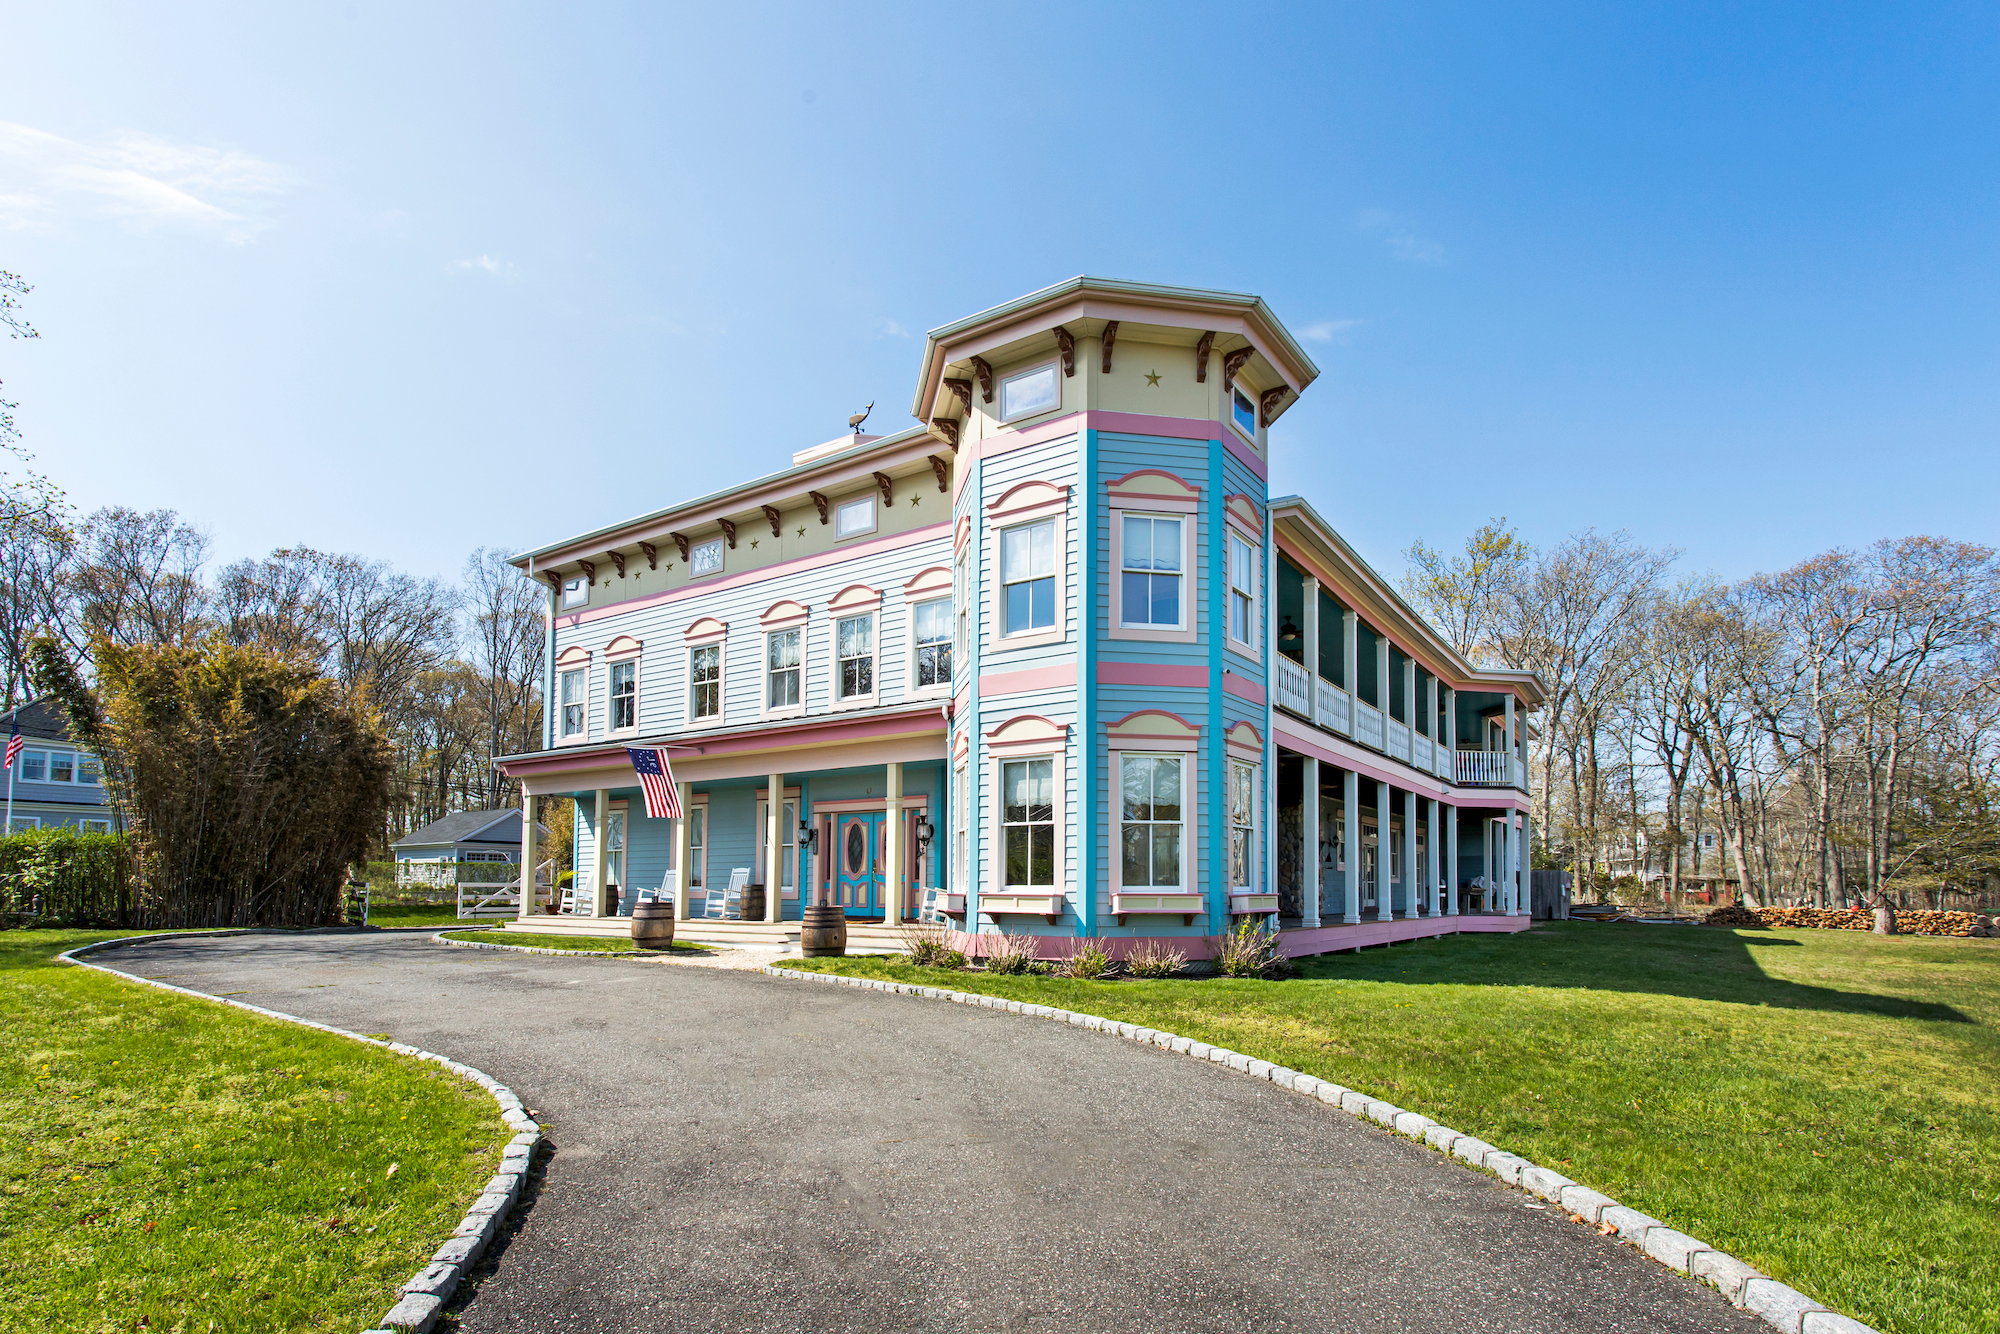 This $4.75M North Fork waterfront estate brings theme park fun to a Victorian-style dream house